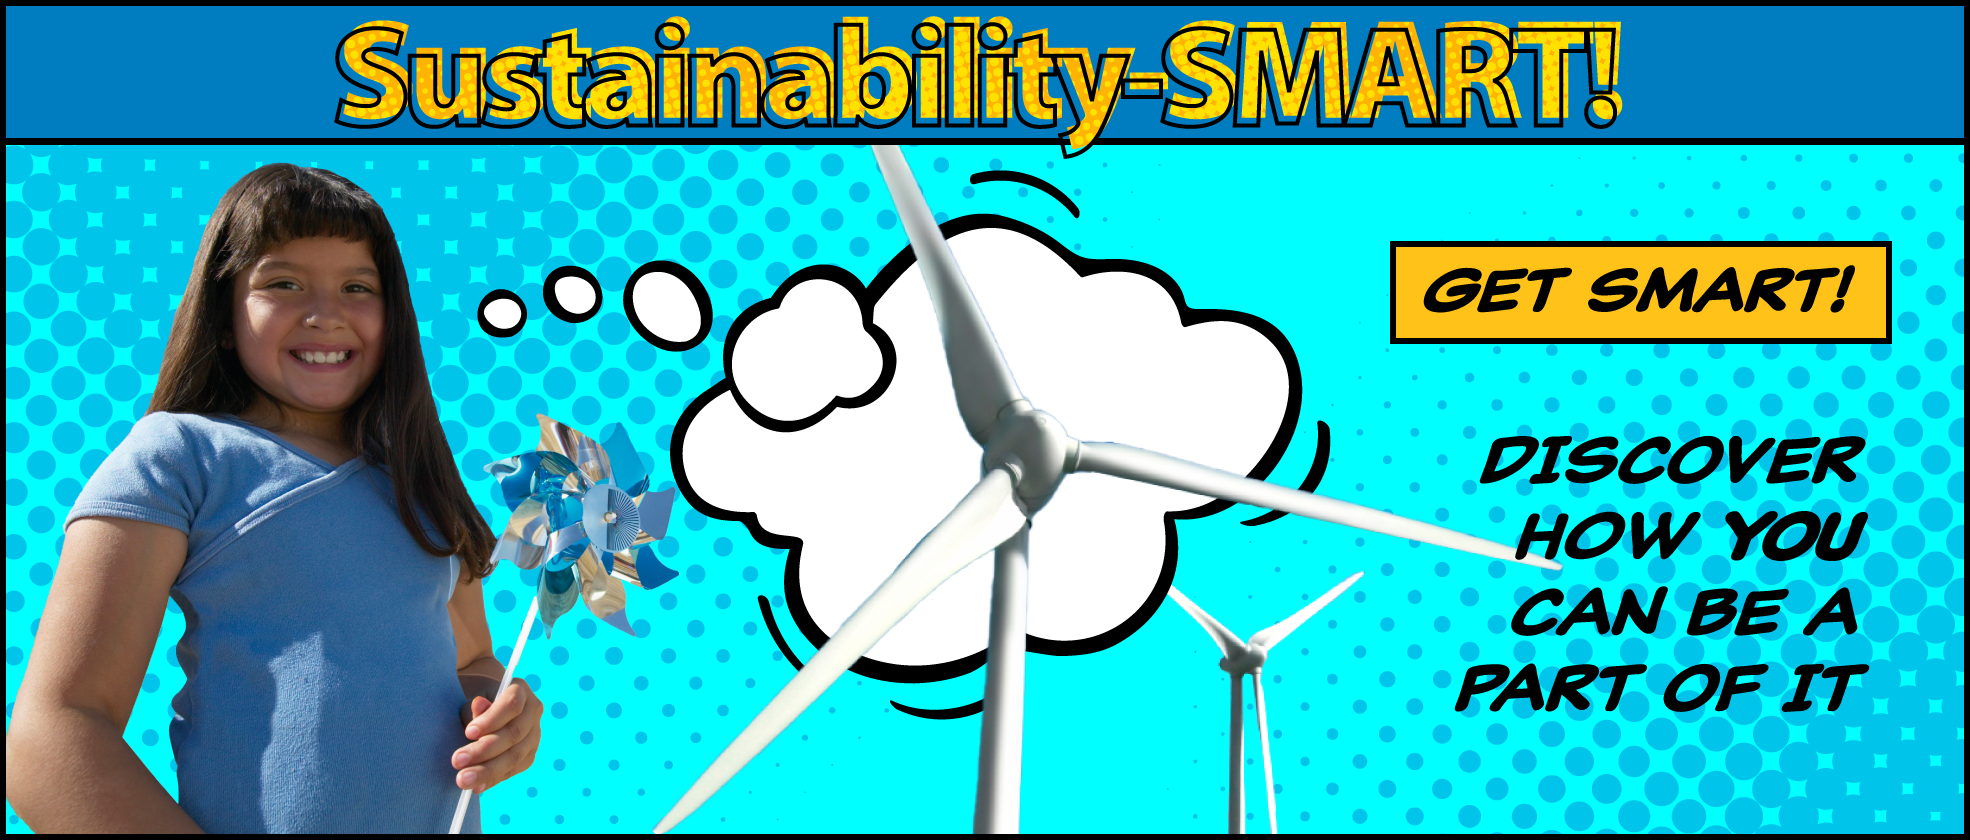 66610 Sustainability SMART hmpg carousel 1970x840 1